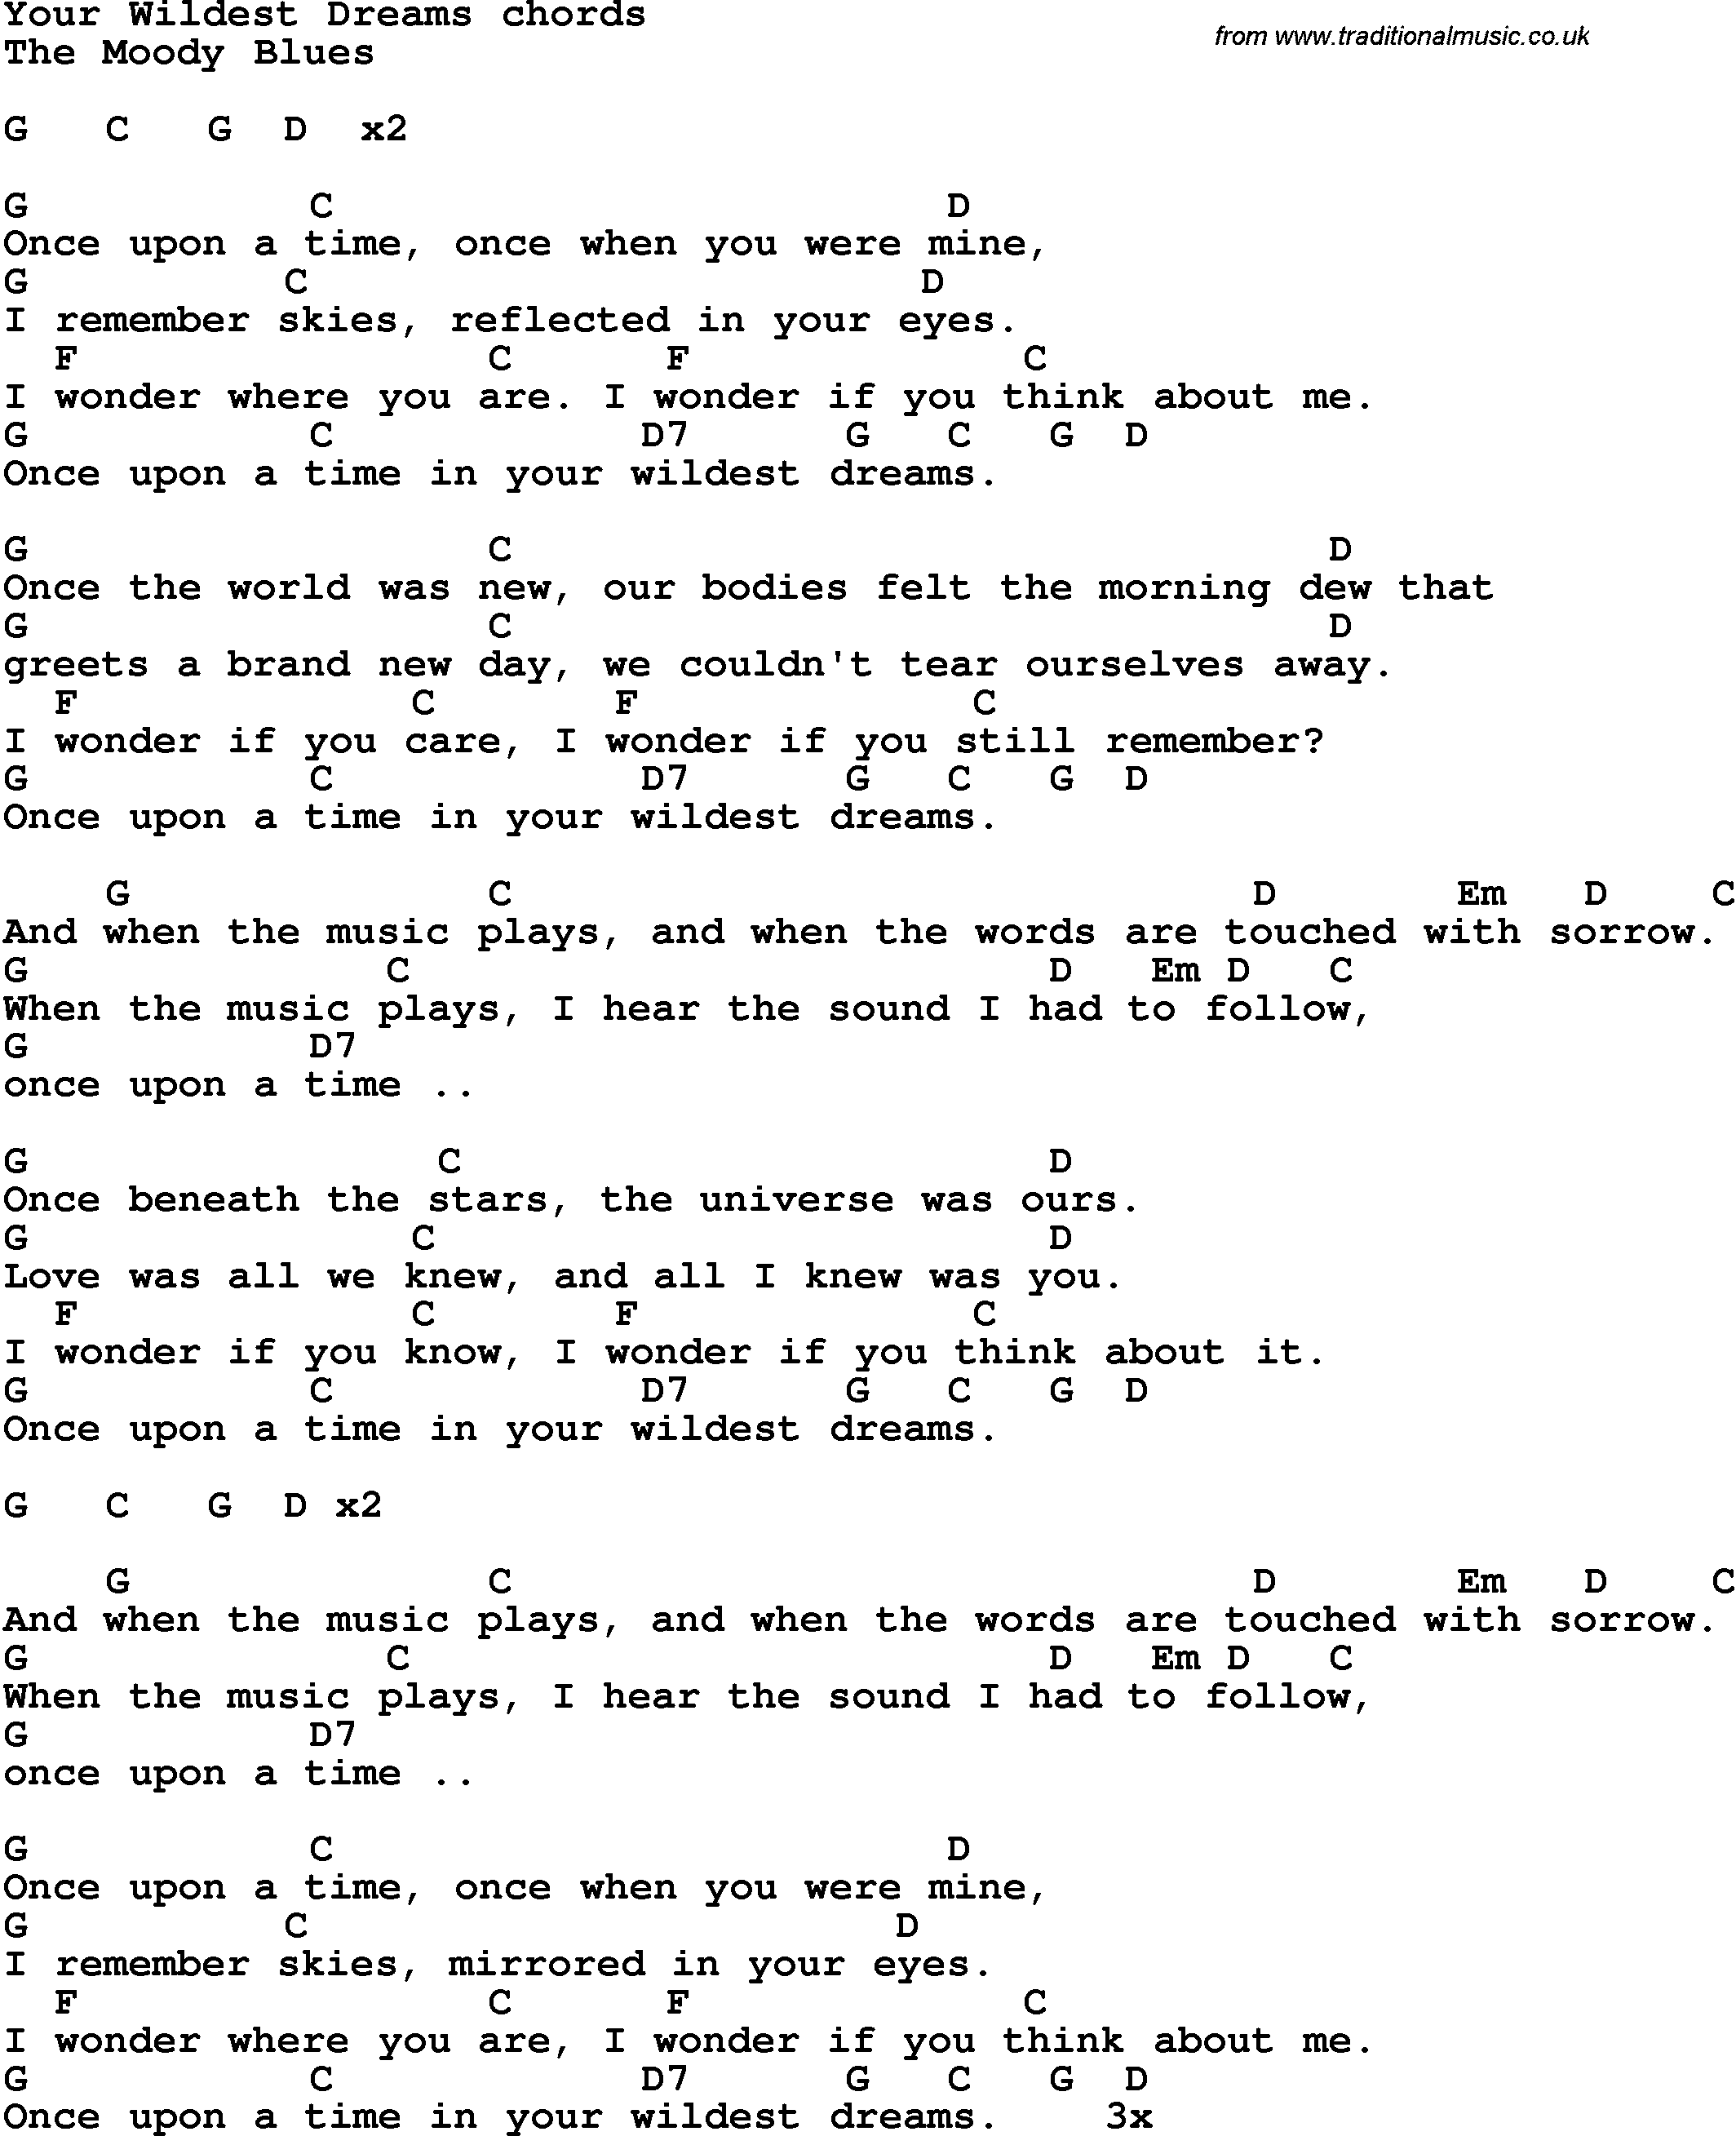 Song Lyrics with guitar chords for Your Wildest Dreams